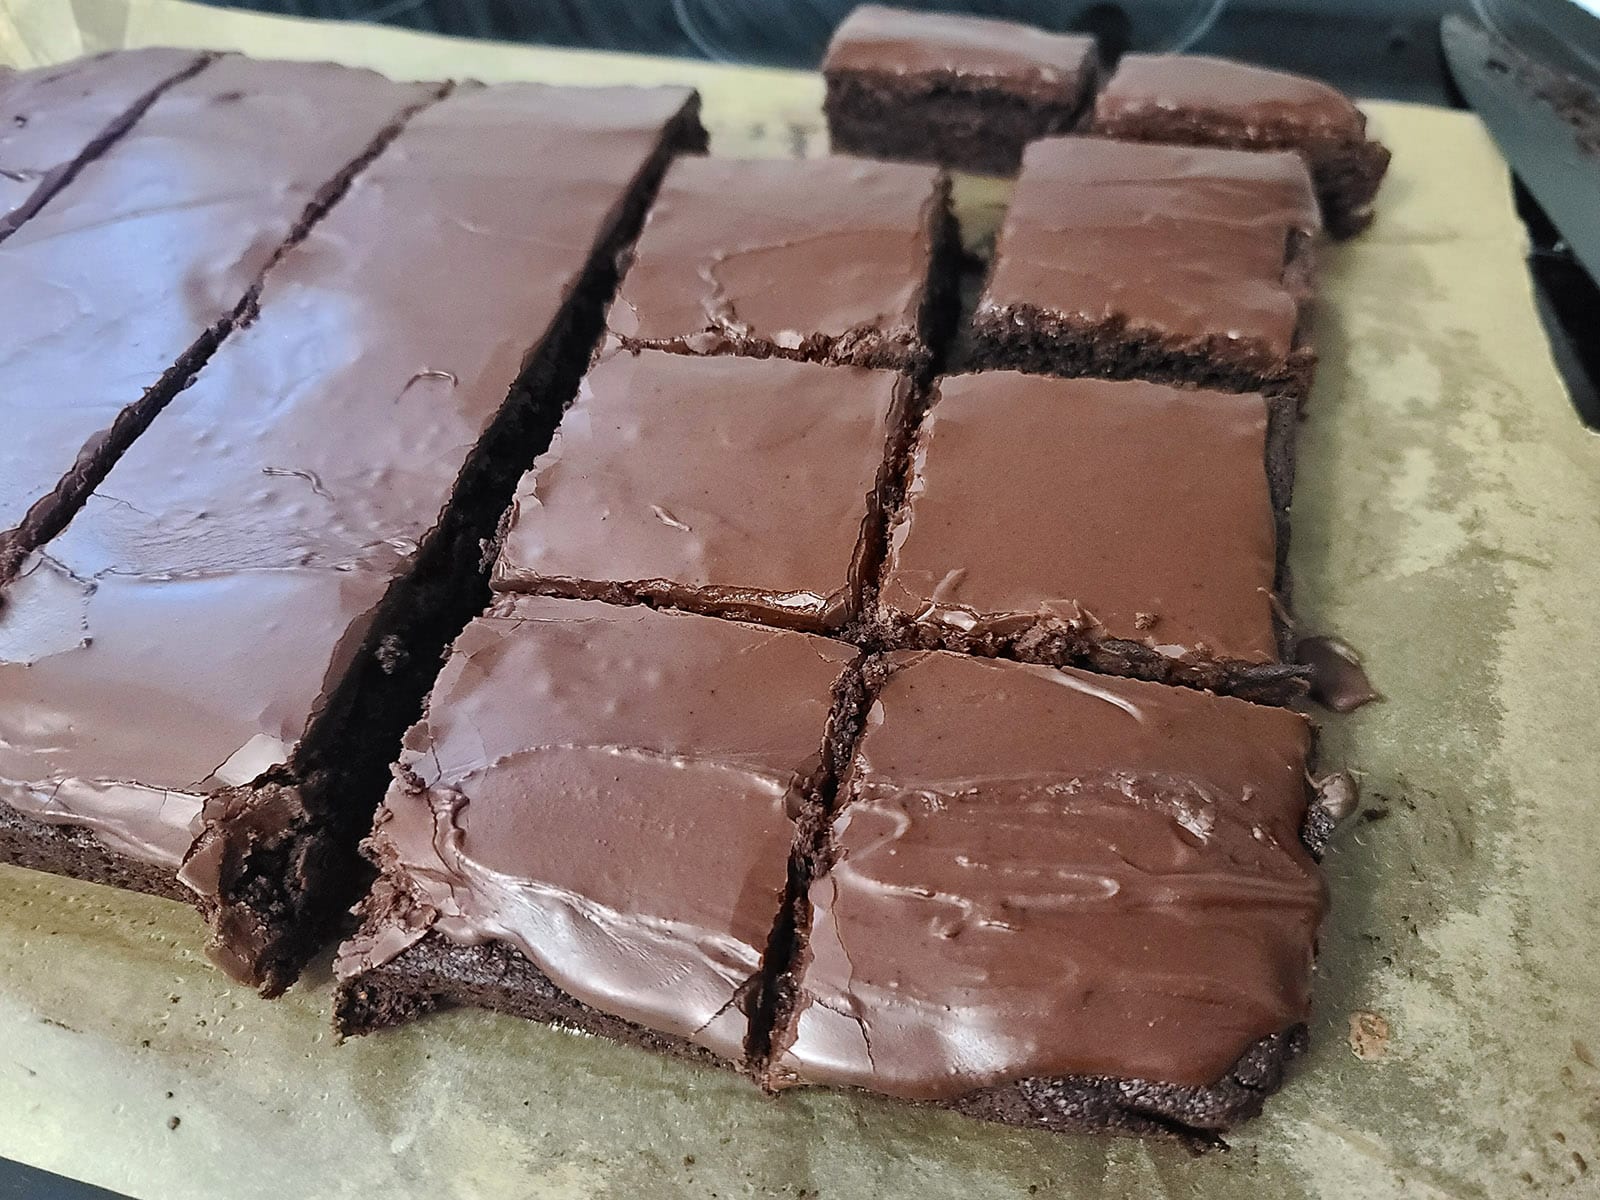 A slab of brownie being cut into squares.